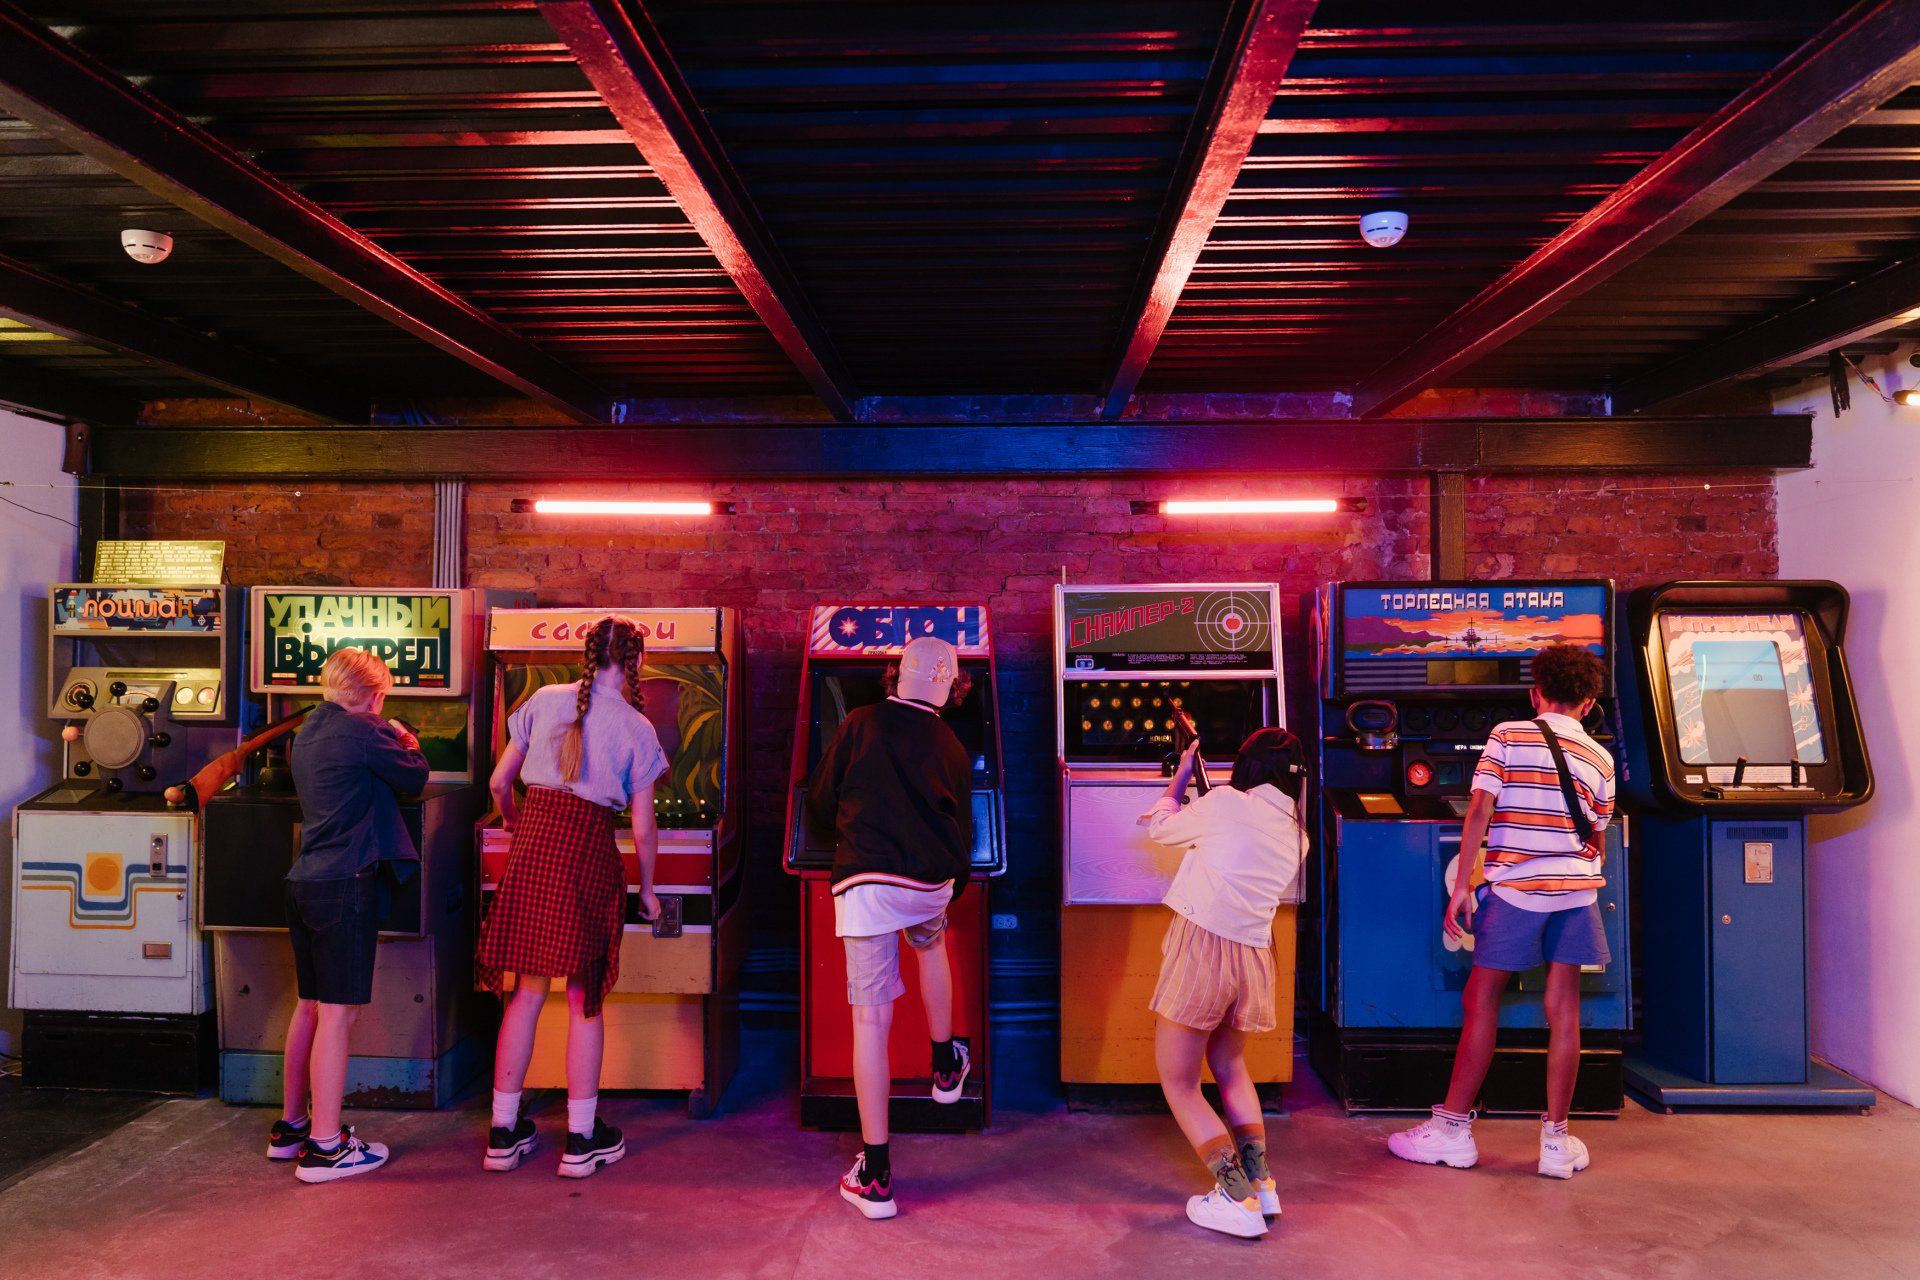 A group of people are playing video games in an arcade.